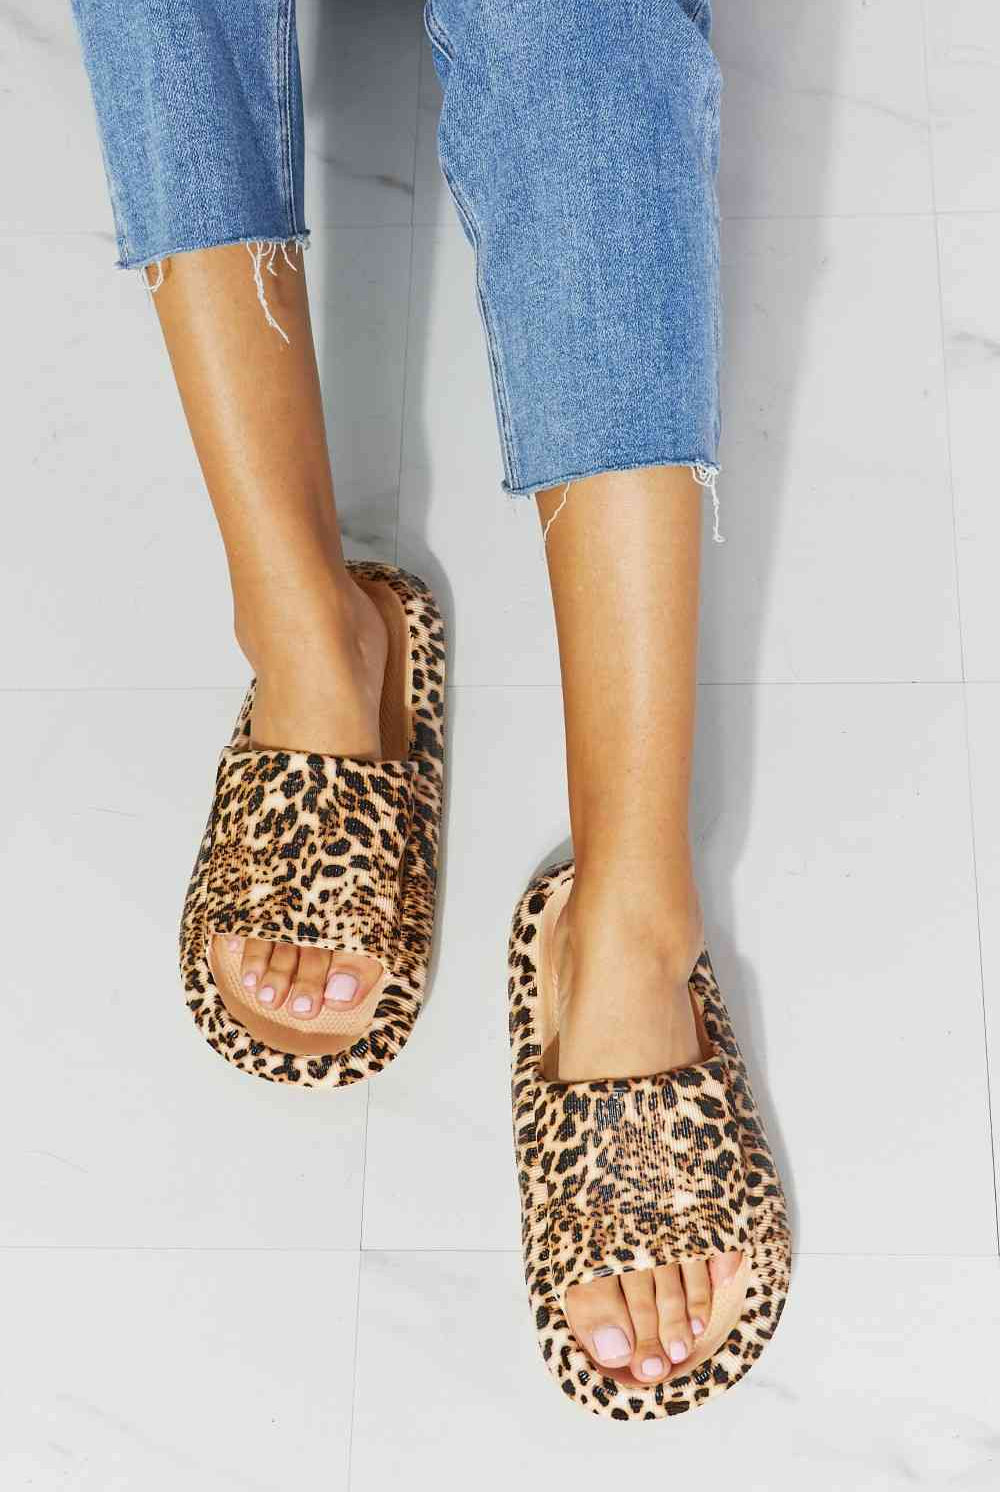 Light Gray MMShoes Arms Around Me Open Toe Slide in Leopard Shoes